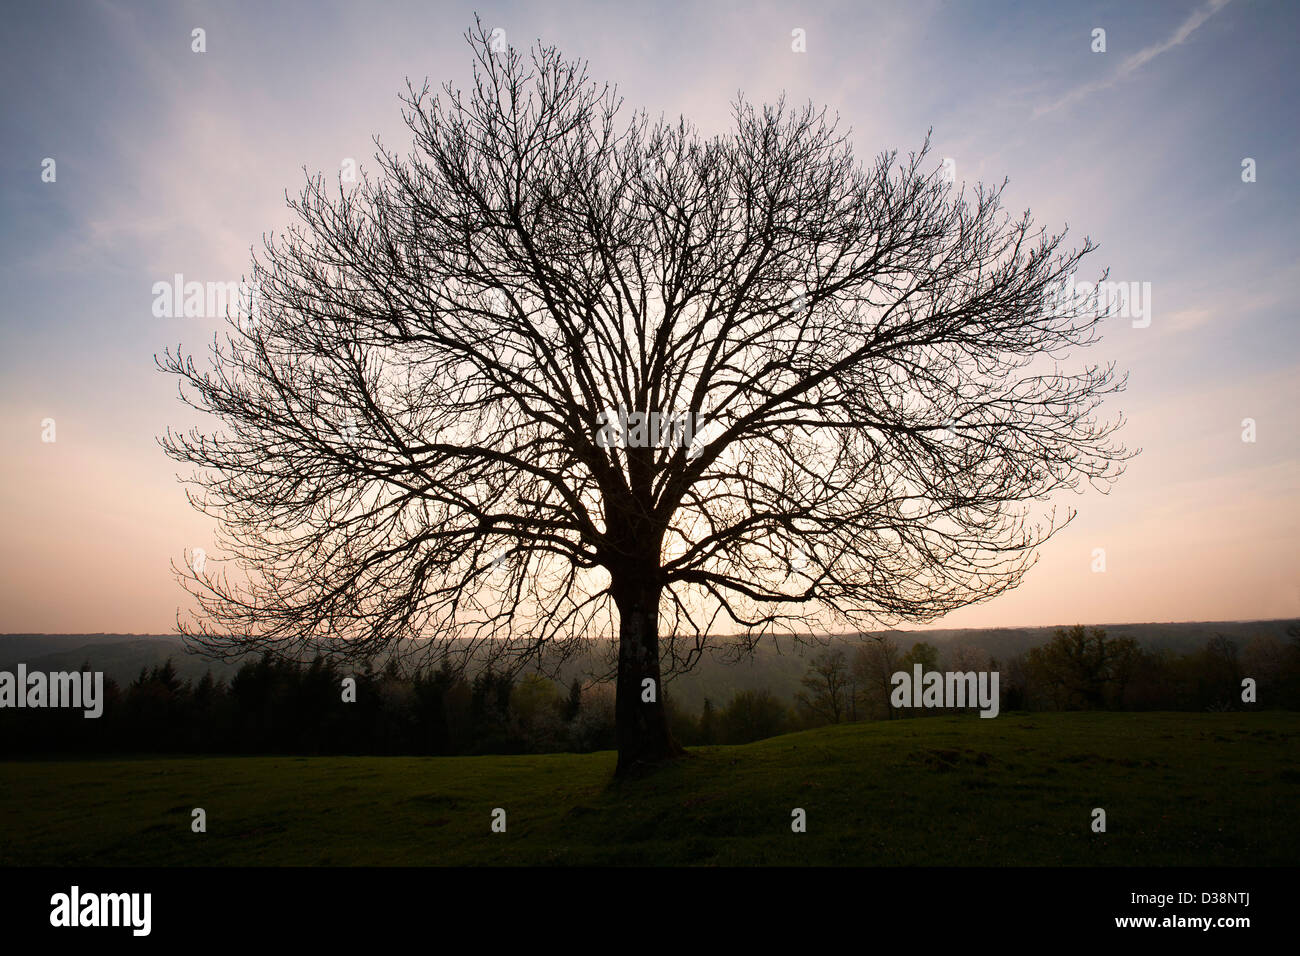 Silhouette de bare tree in field Banque D'Images